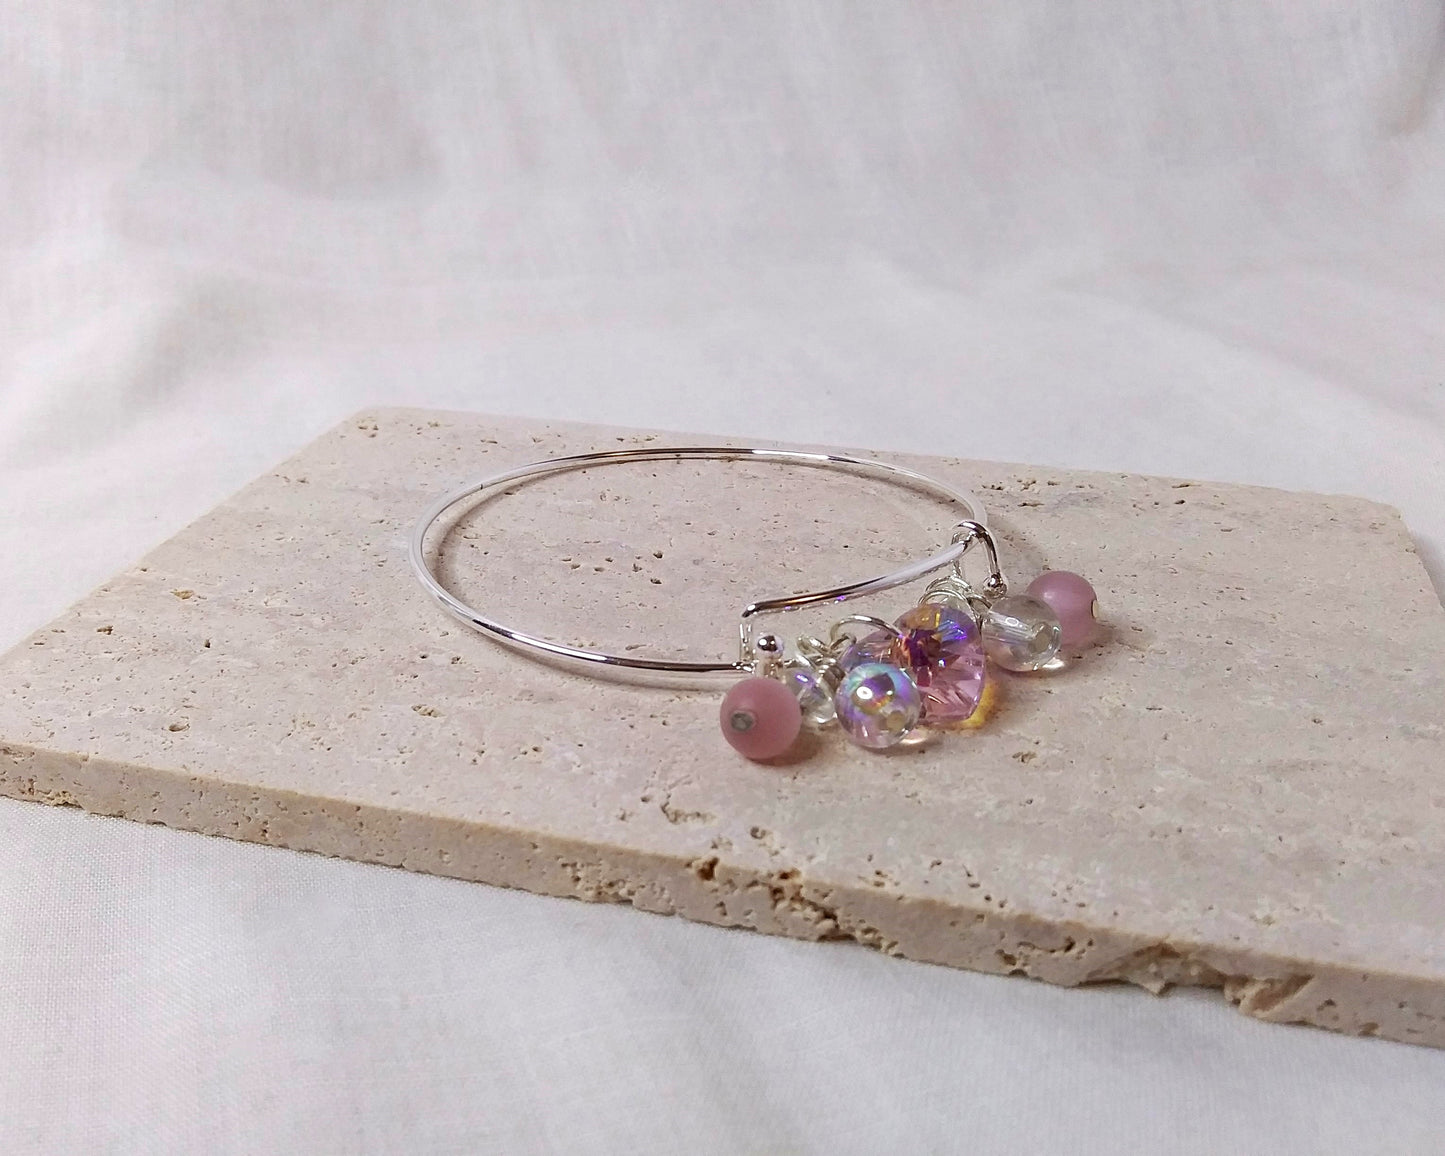 Pink and silver beaded bangle bracelet